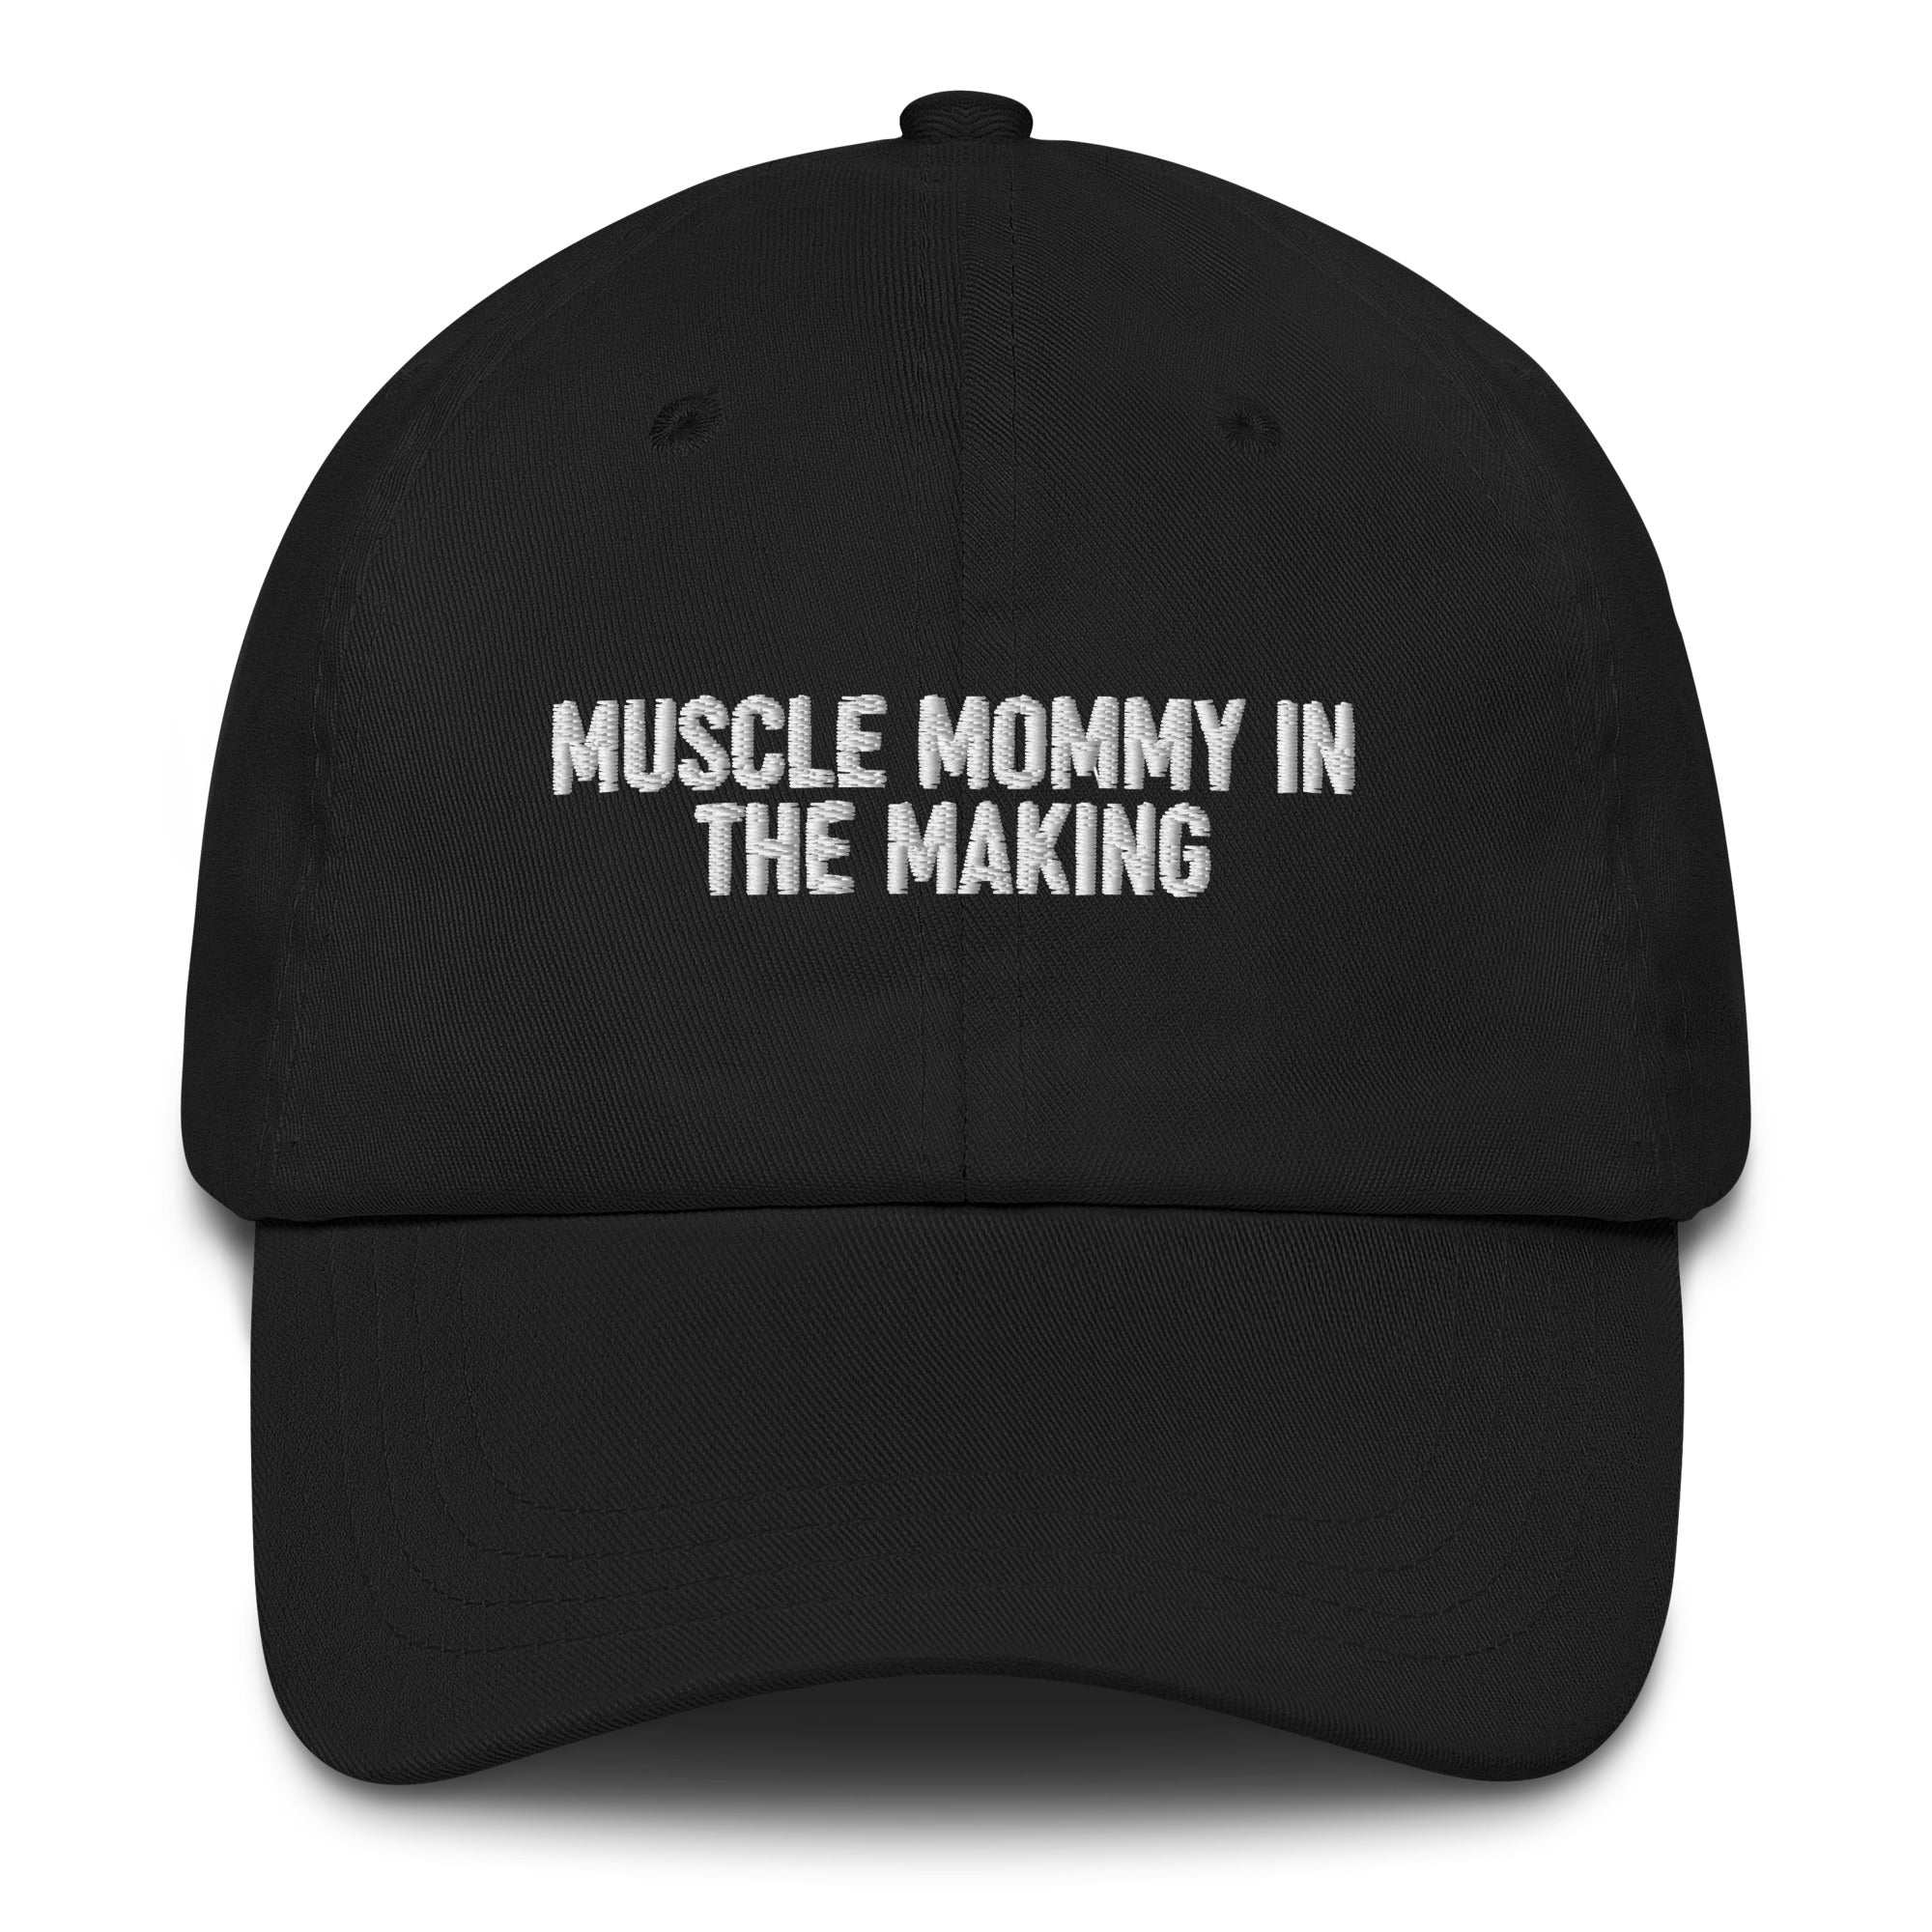 Basecap "Muscle Mommy In The Making" schwarz